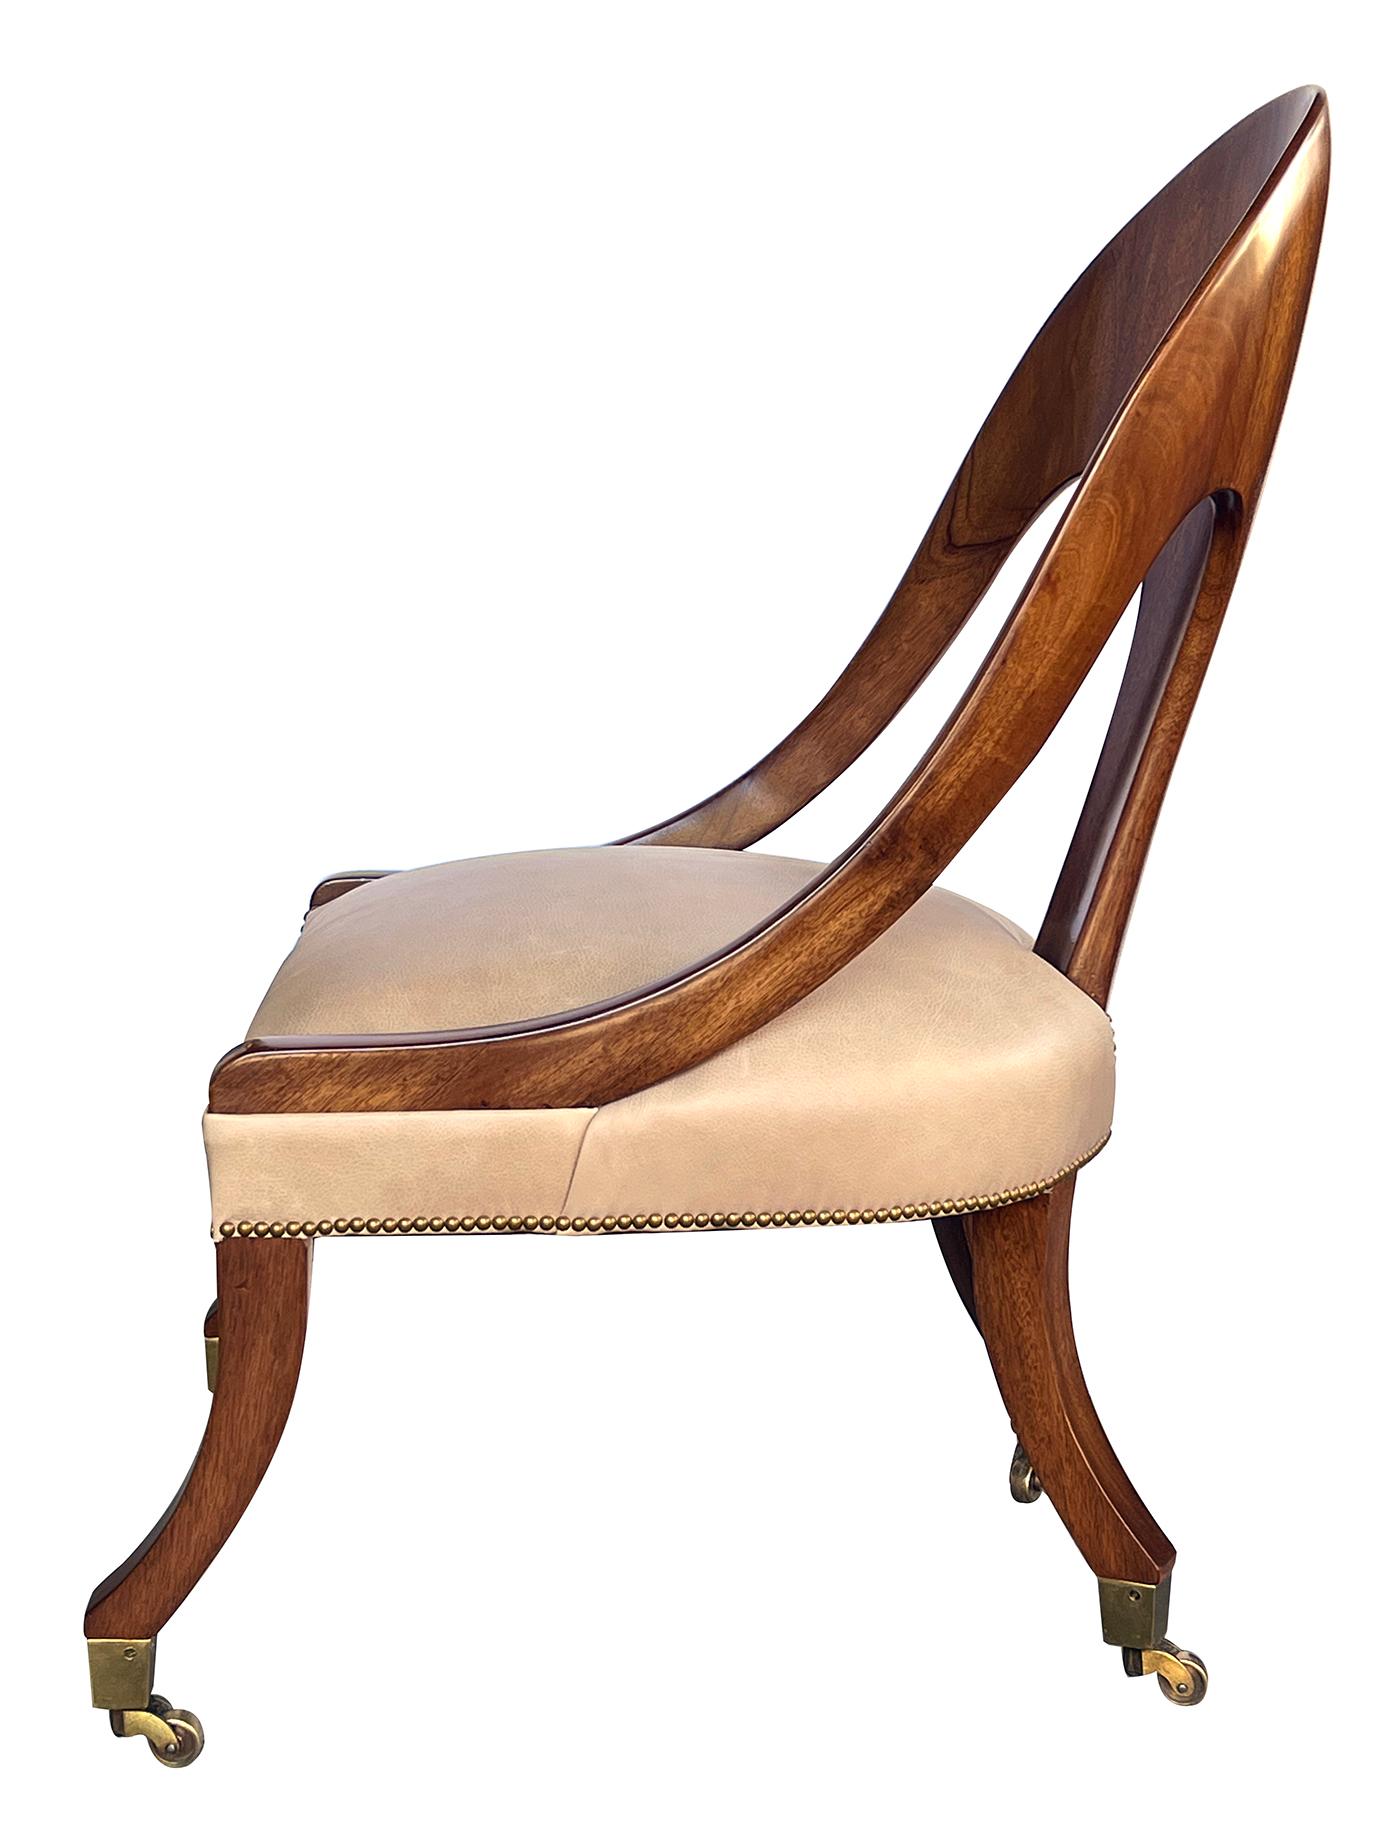 Leather Shapely English Regency Style Solid Mahogany Spoonback Chair For Sale